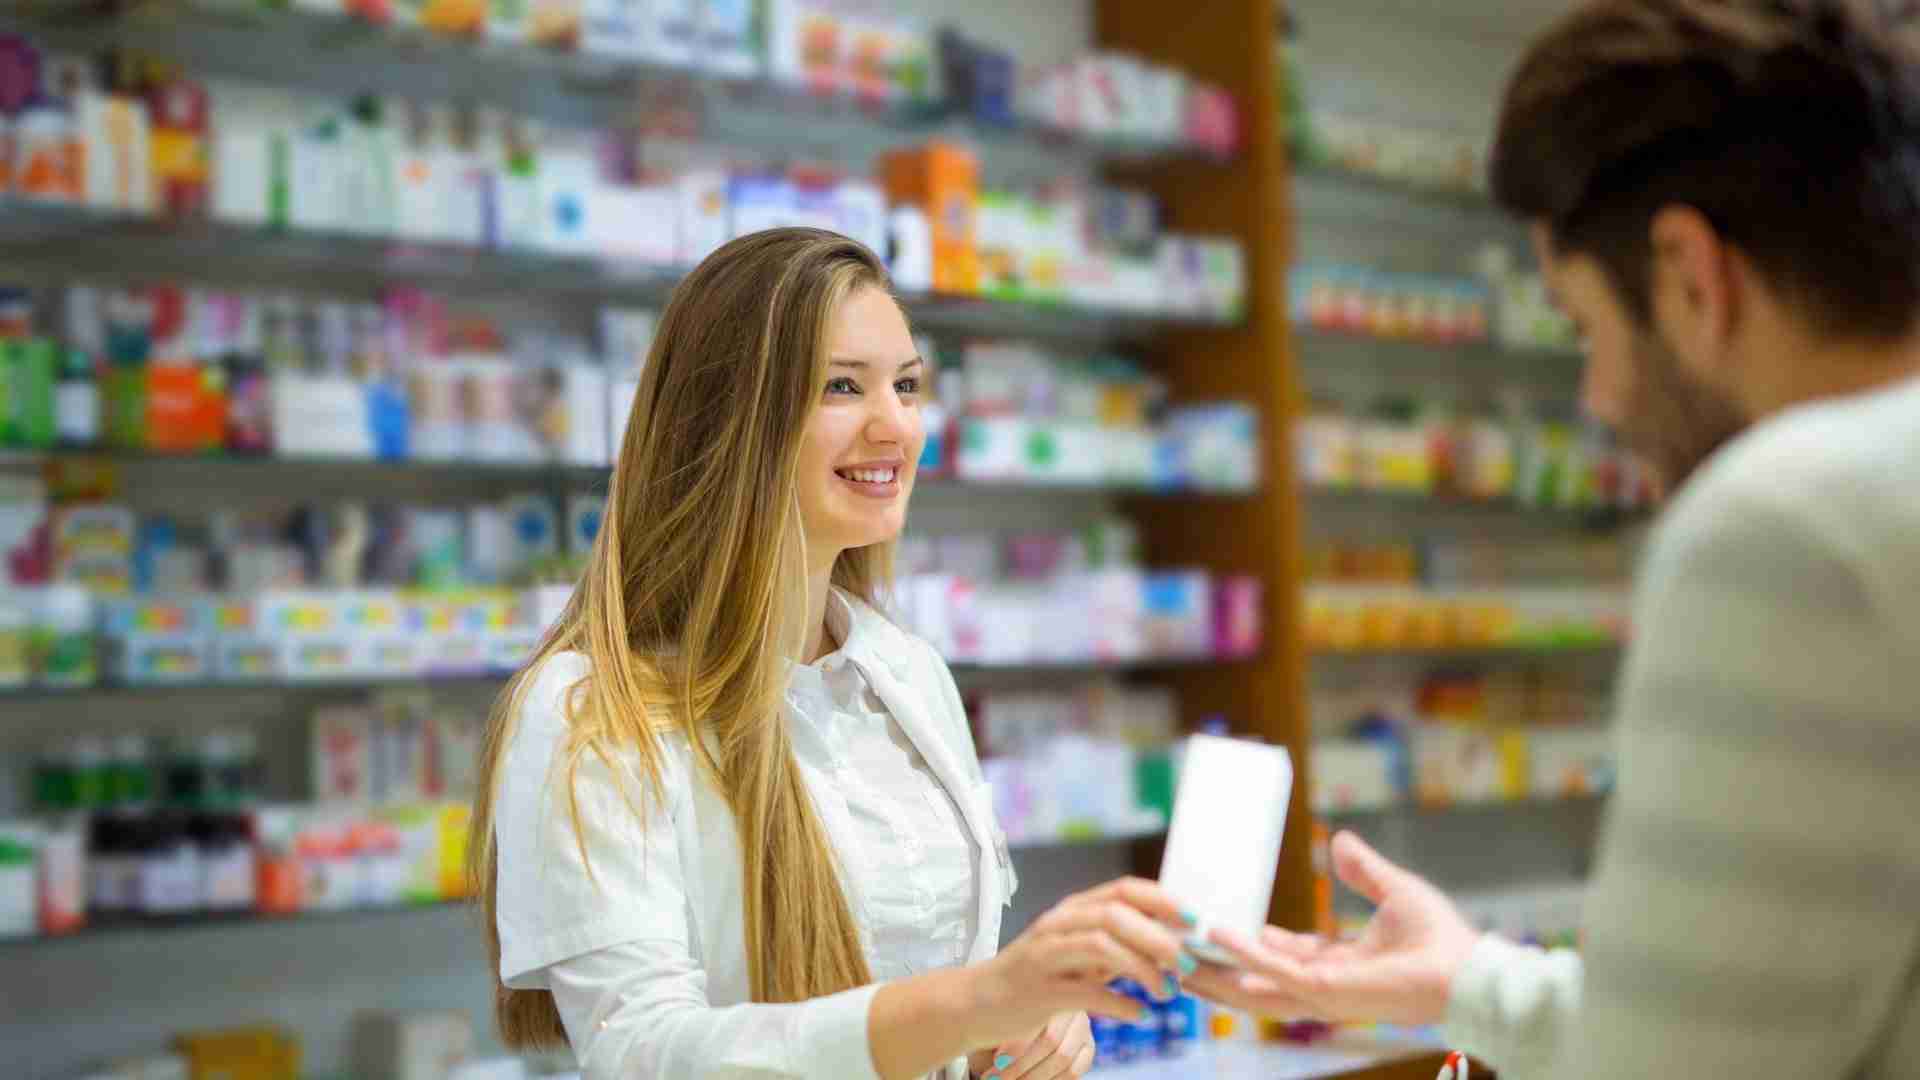 What is a Compounding Pharmacy